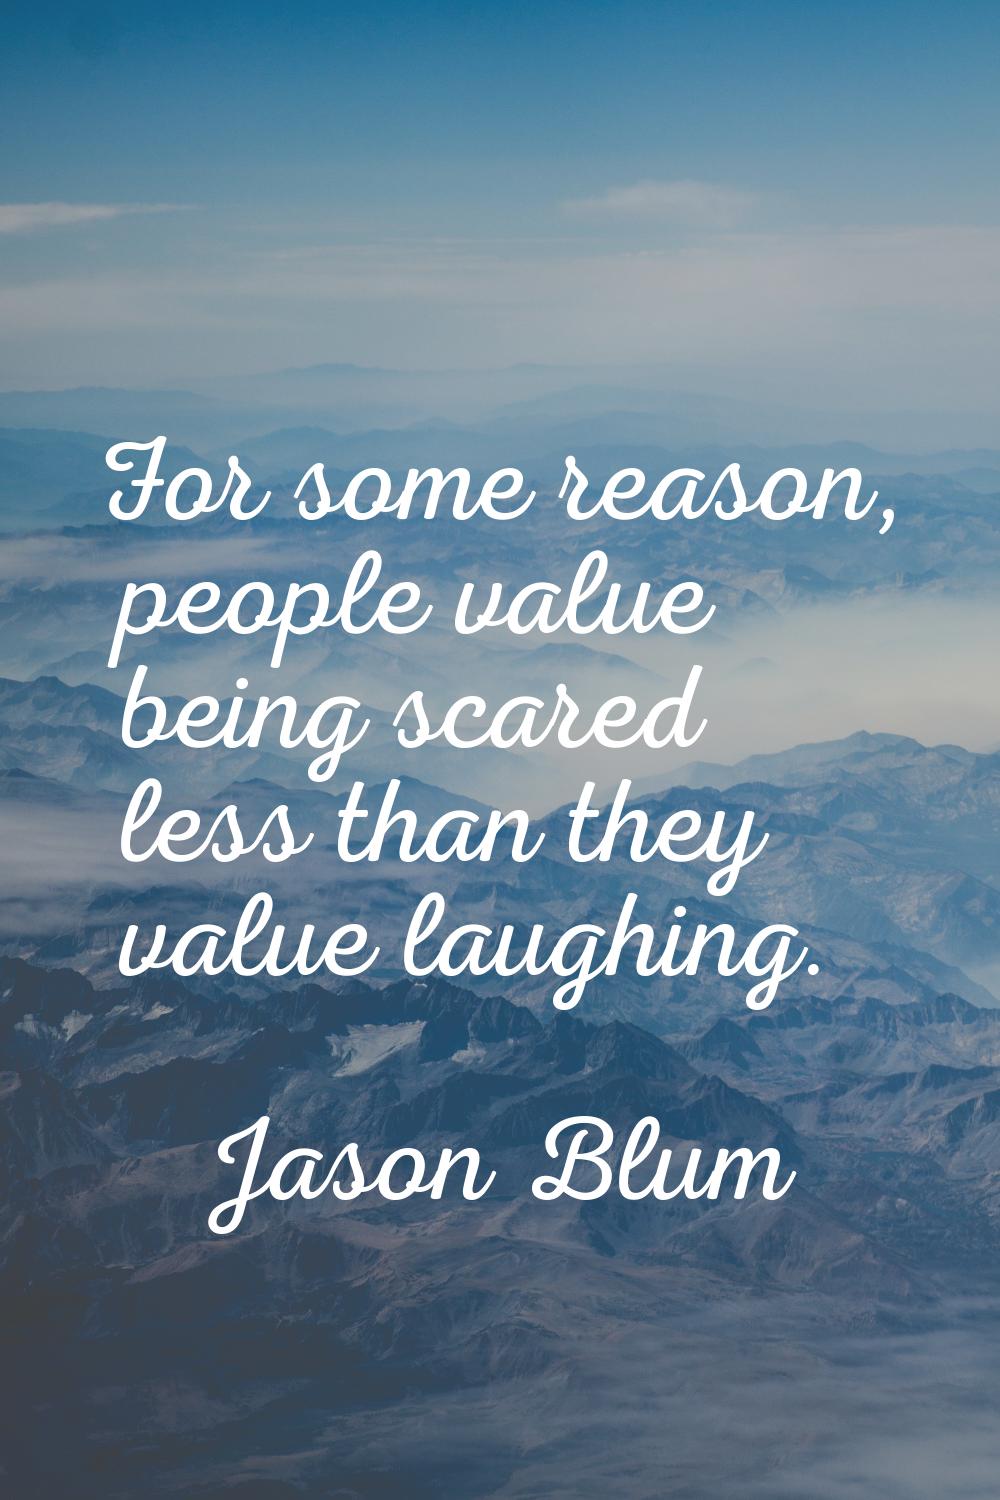 For some reason, people value being scared less than they value laughing.